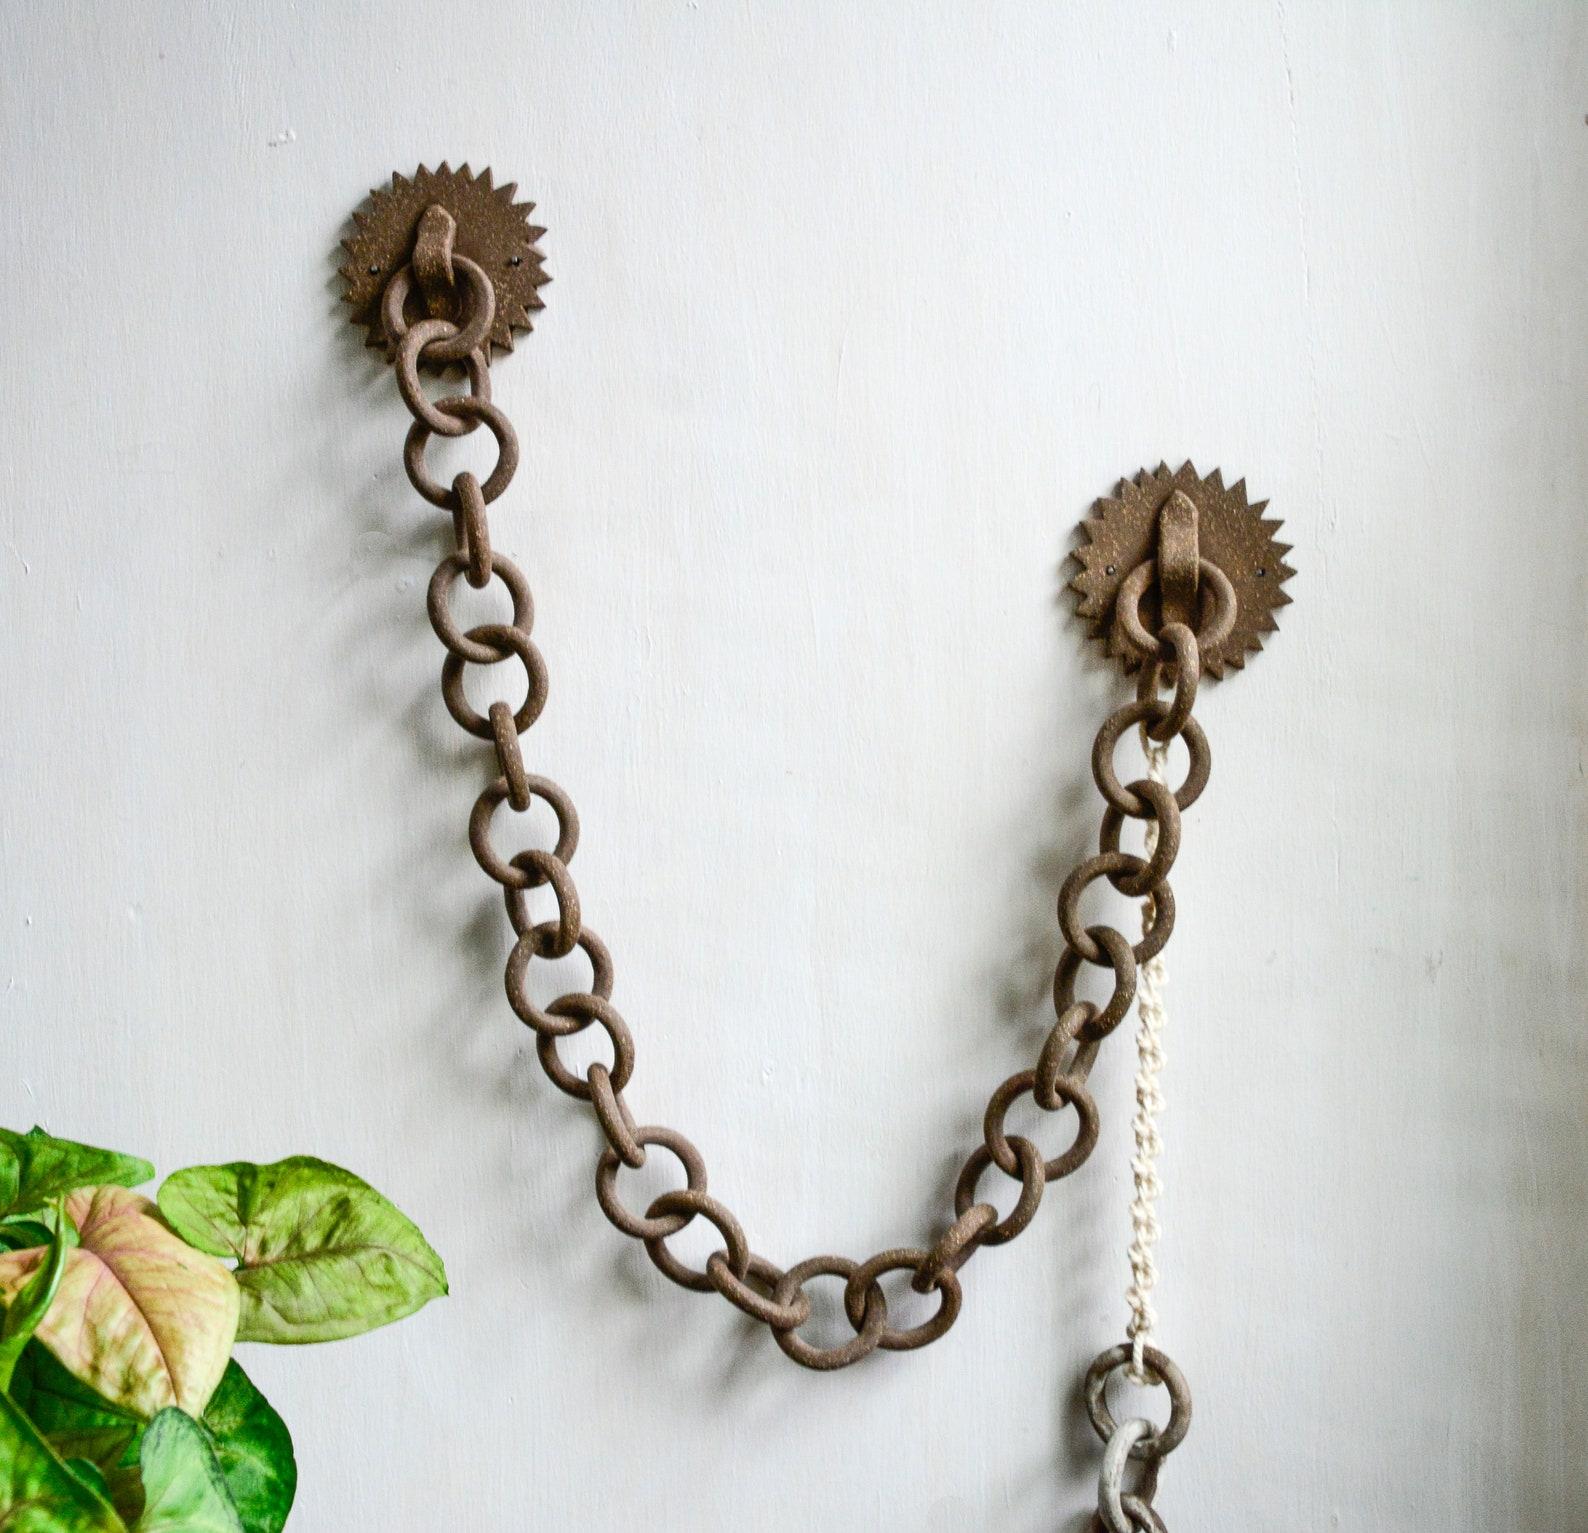 Hand-Crafted Ceramic Link Chain and Macramé Wall Sculpture For Sale